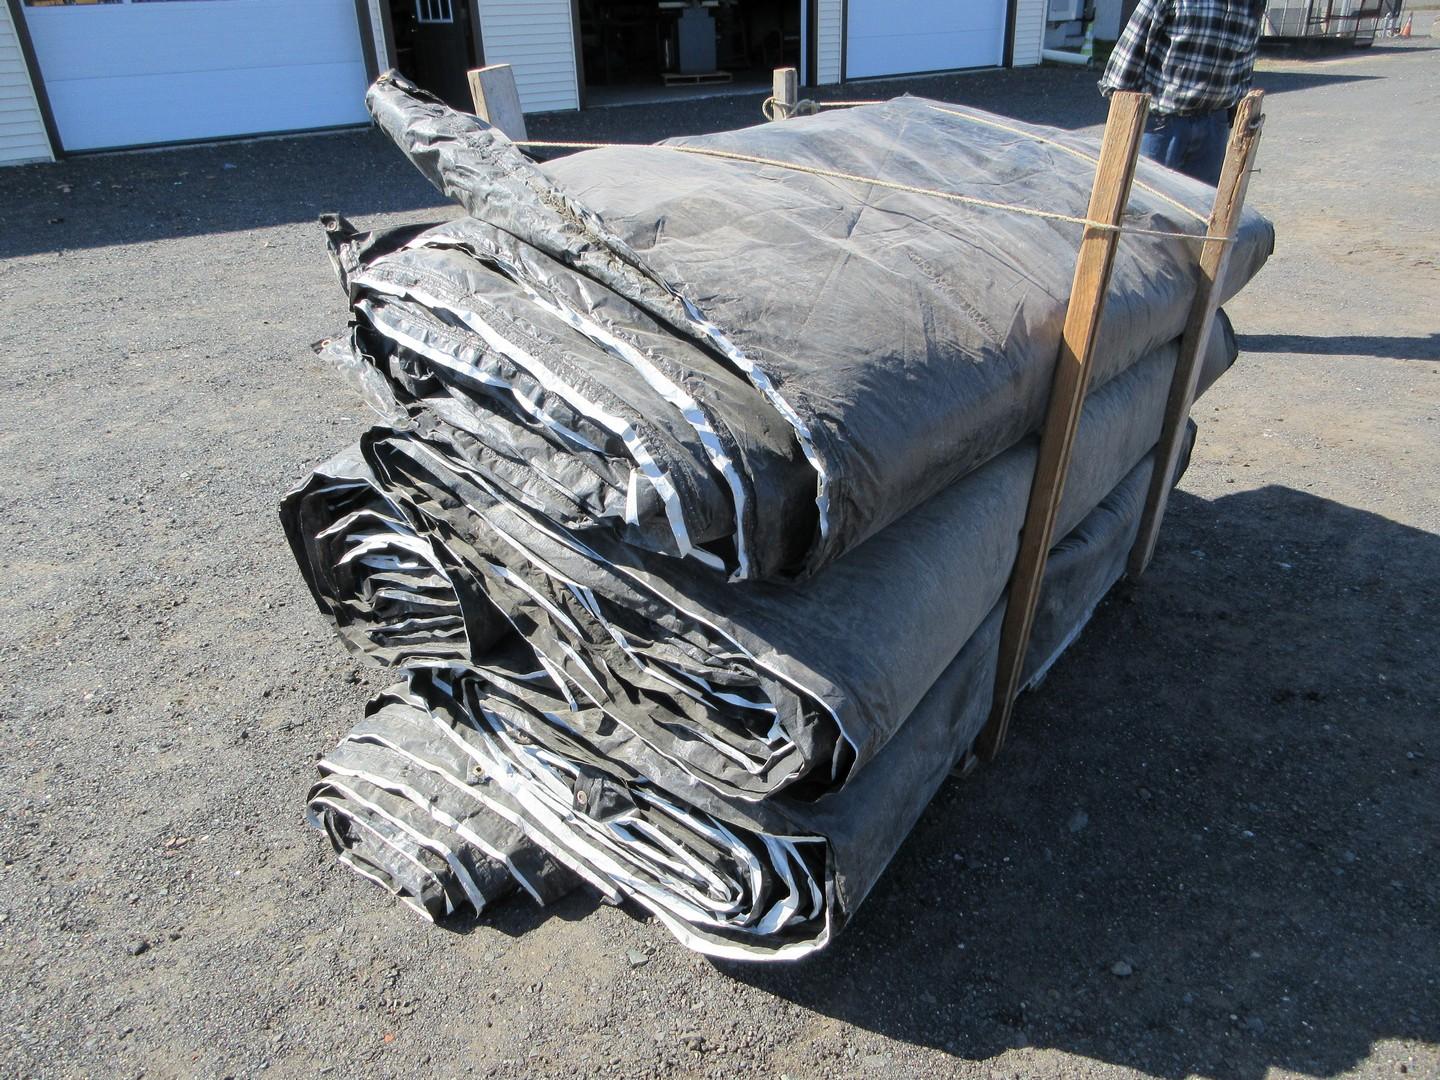 Quantity of Concrete Curing Blankets